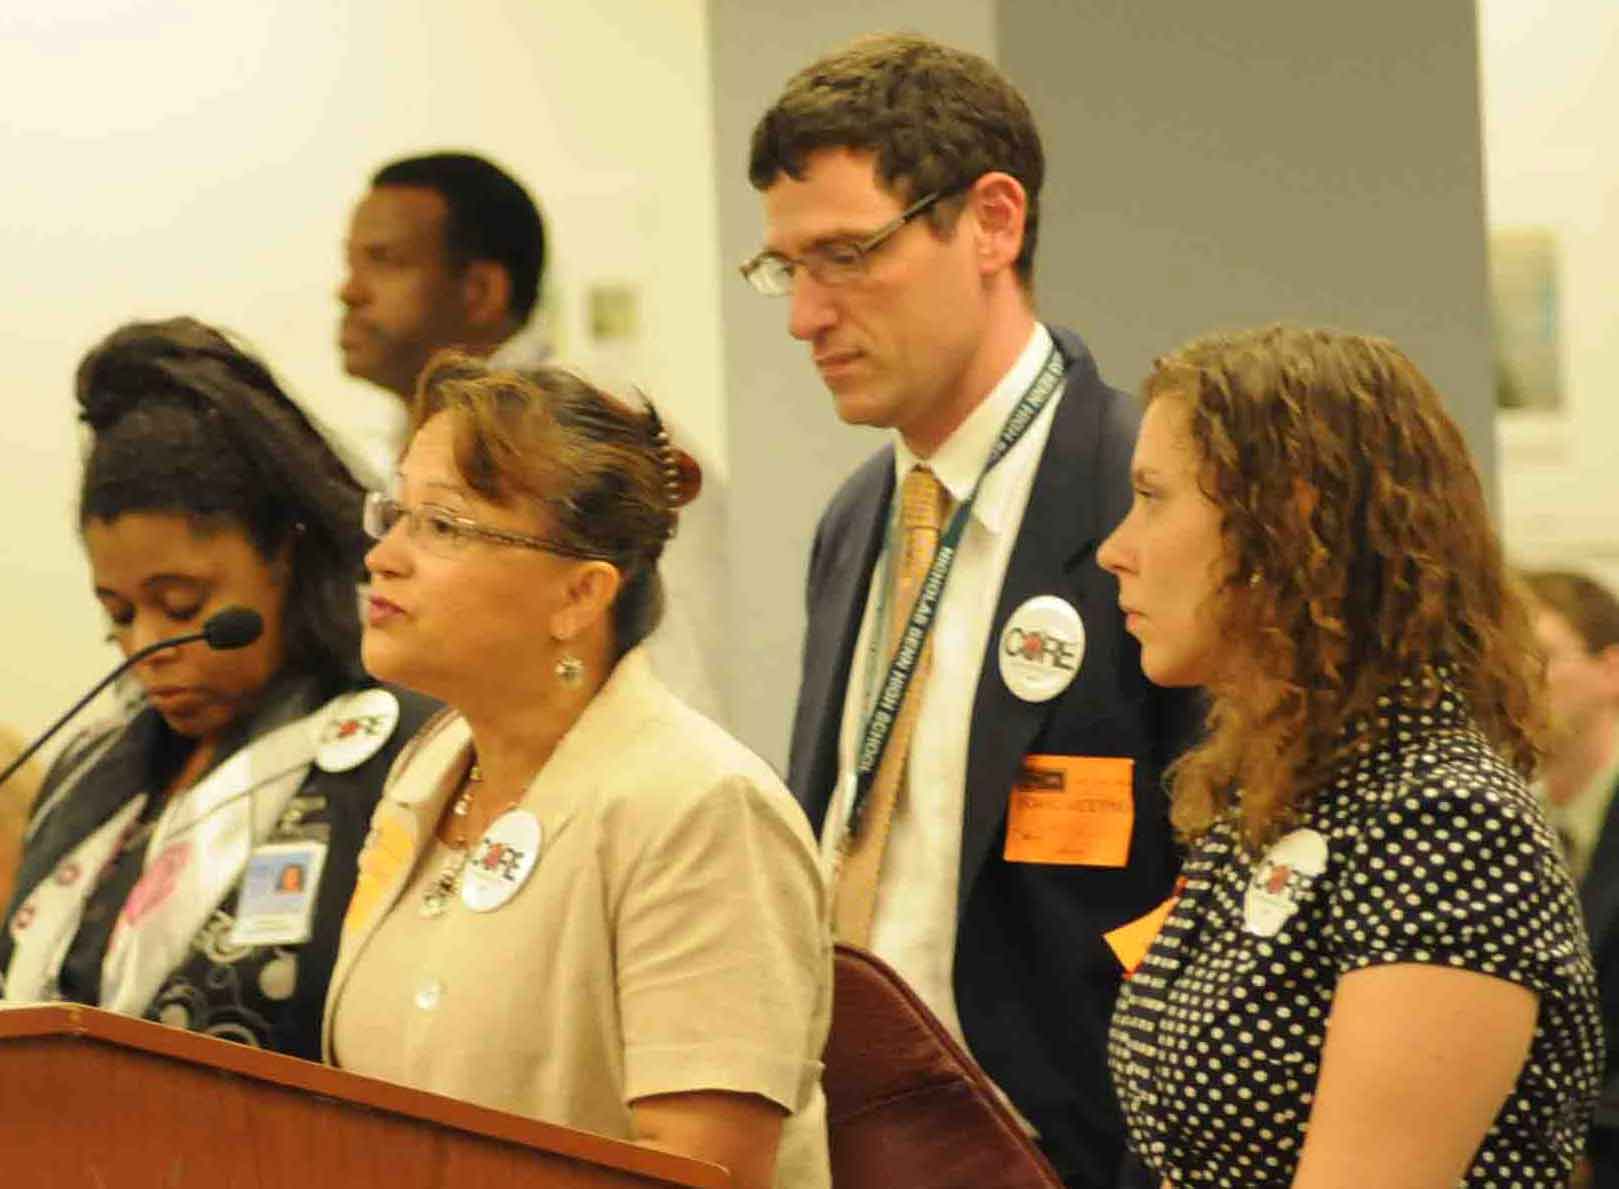 Clemente High School teacher Sara Echevarria (above at microphone speaking to the May 26, 2010 meeting of the Chicago Board of Educaton) has been appointed by Karen Lewis to head the CTU grievance department during the summer transition. Standing with Echevarria are (left to right) Patricia Breckenridge, a displaced teacher, Jesse Sharkey (now CTU vice president) and Kristine Mayle (now CTU financial secretary). Substance photo by George N. Schmdt.